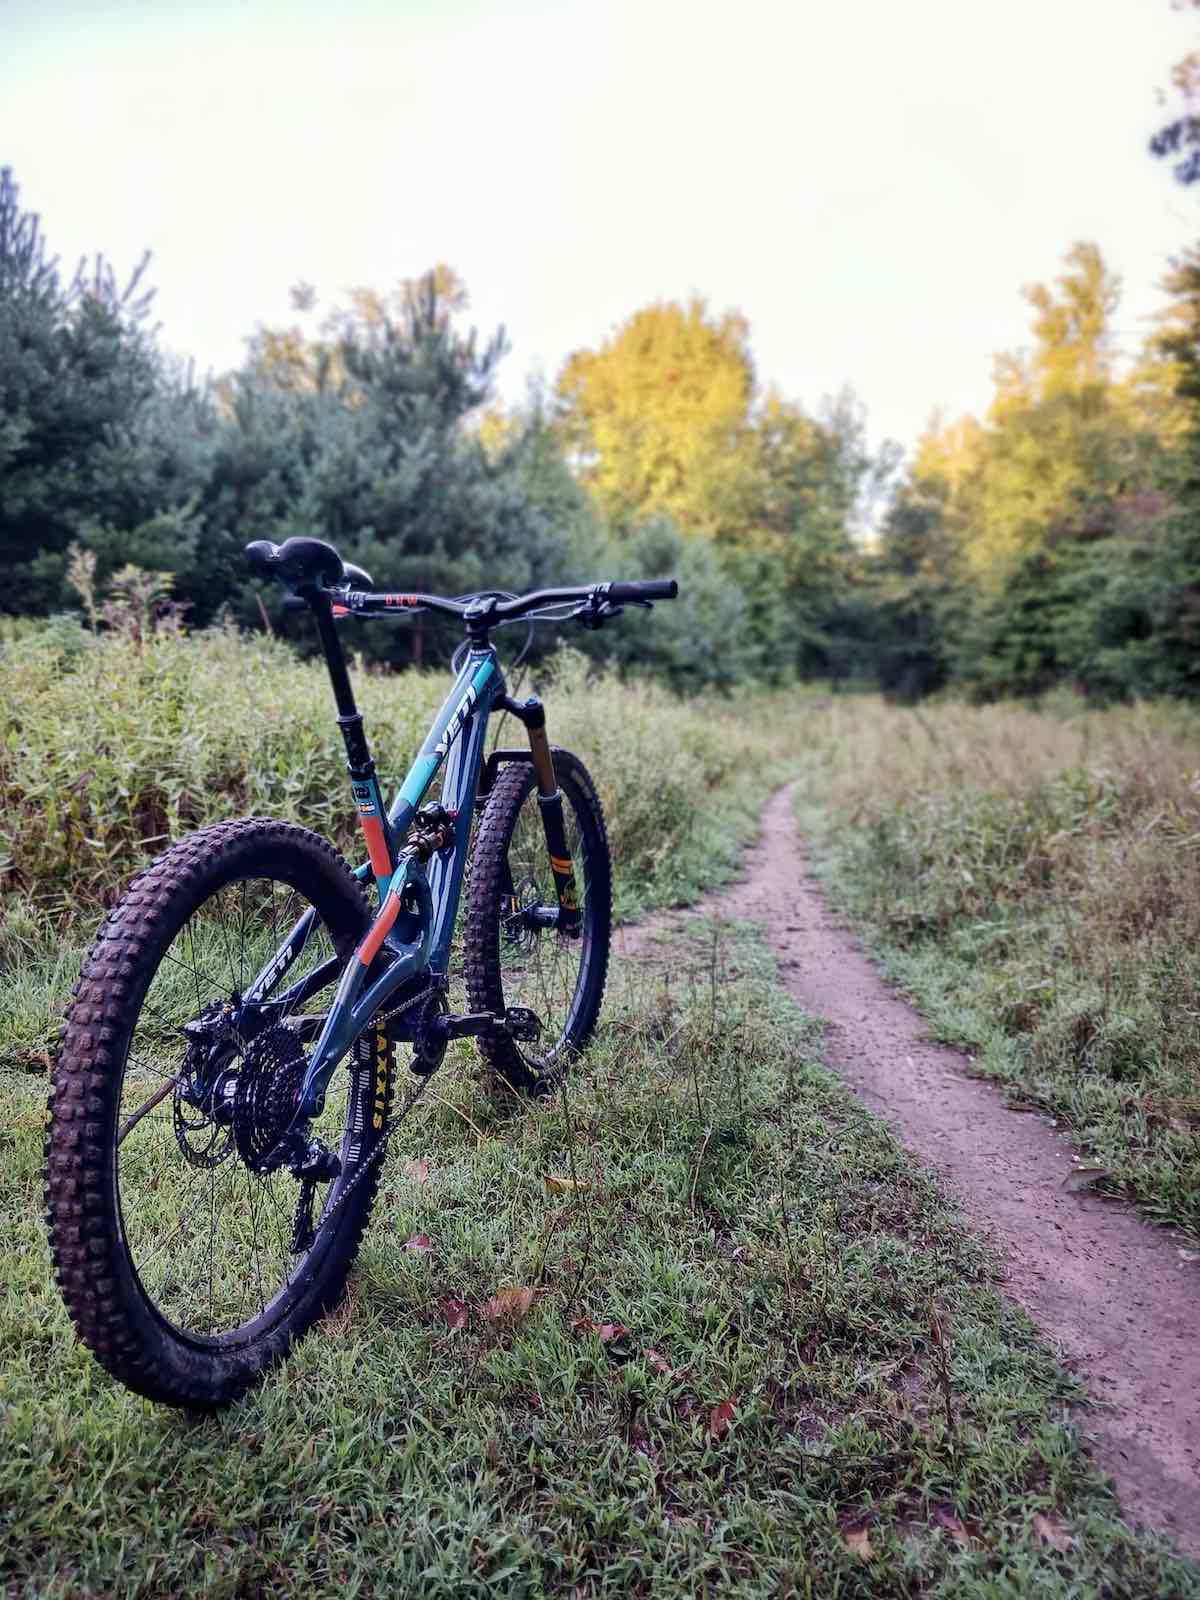 bikerumor pic of the day a mountain bike is on the grass next to single track heading towards the forest with the sun shining on the tops of the trees in the distance.